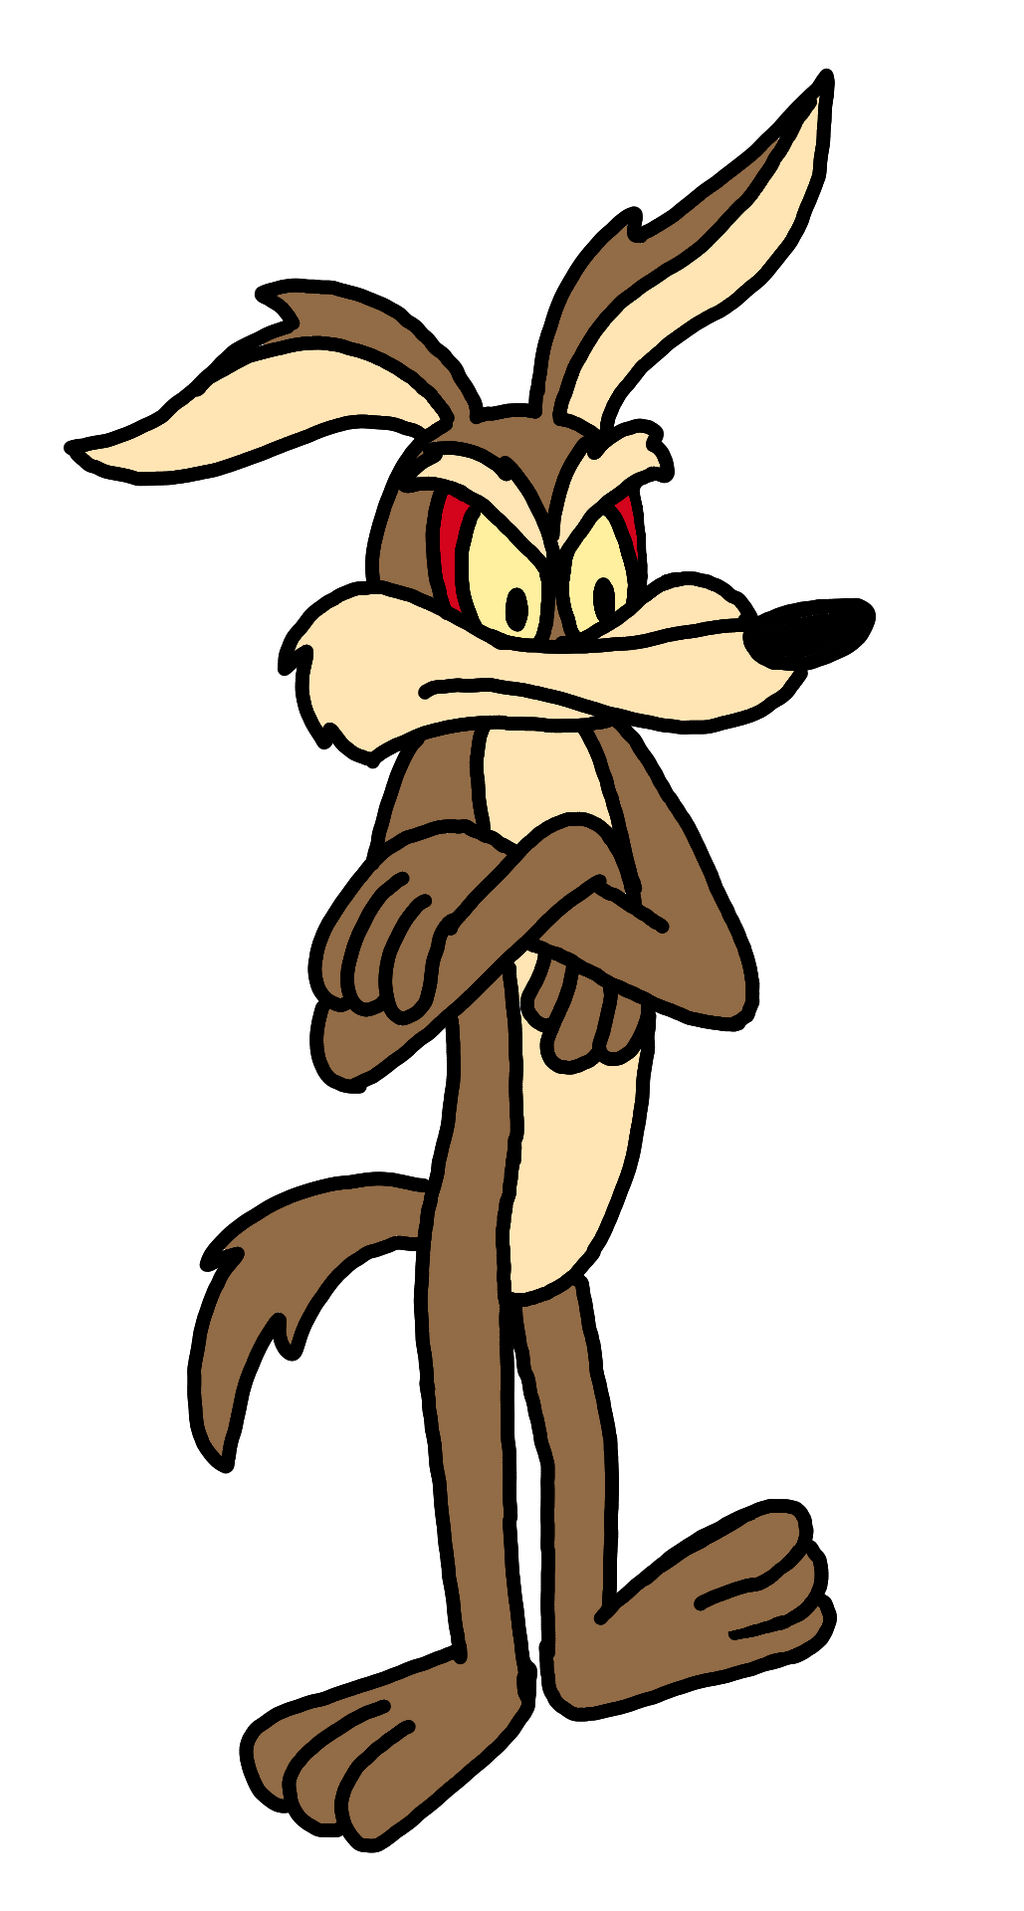 Wile E. Coyote by Art-of-Gameland on DeviantArt